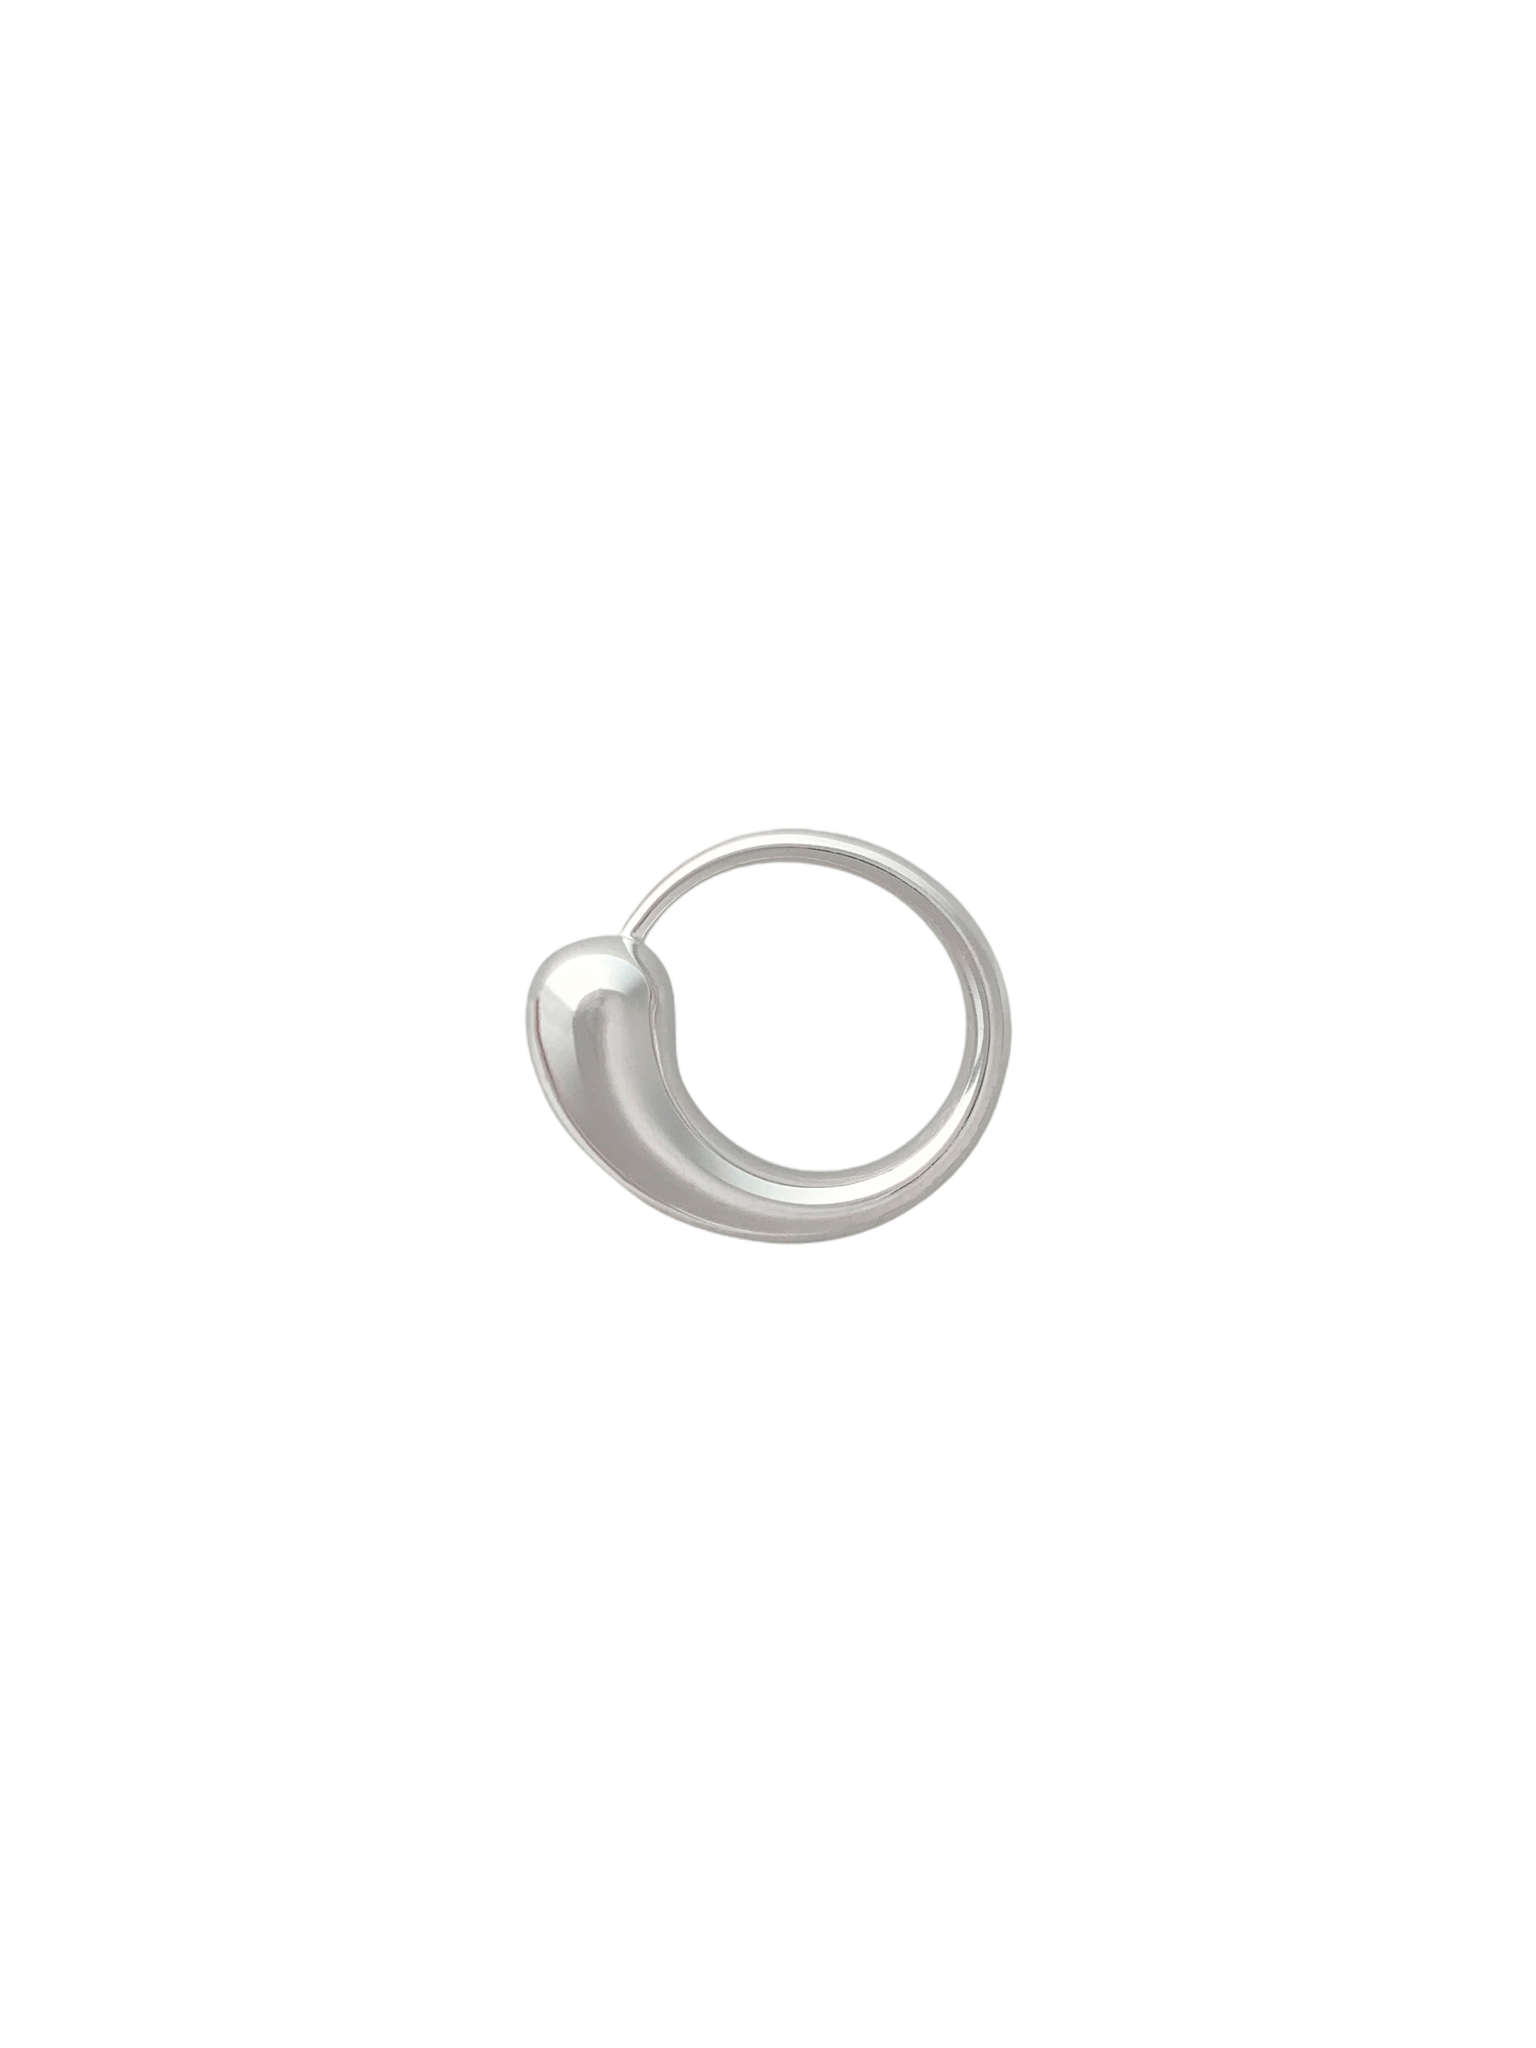 Closure ring in silver